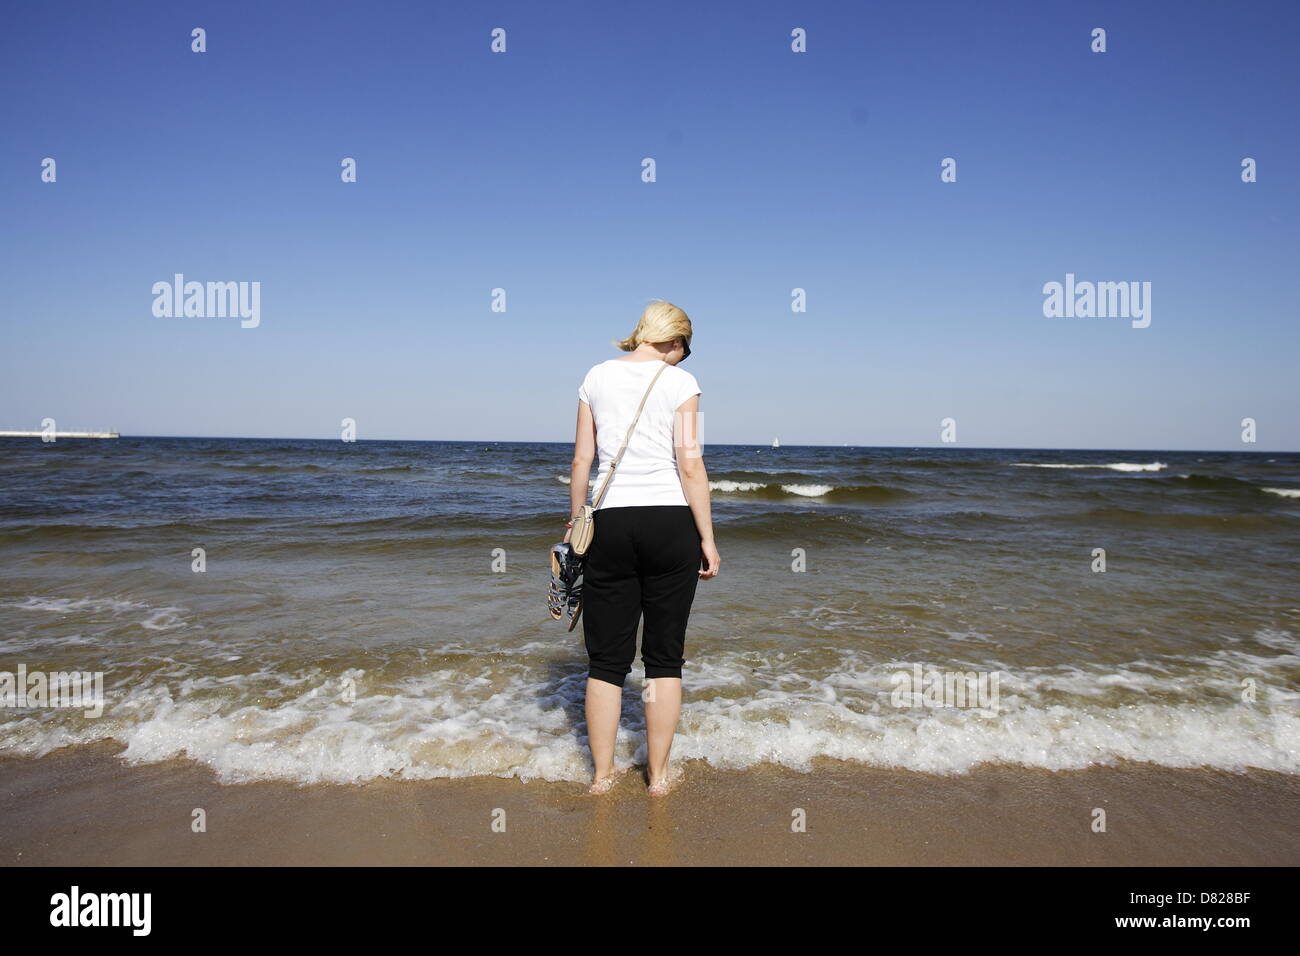 Sopot, Poland 17th, May 2013 Due the very high temperatures over 30 Celsius degrees many tourists and Sopot citizens walks on the Baltic Sea beach, tanning and few very brave swim in the cold Baltic water. Credit:  Michal Fludra / Alamy Live News Stock Photo